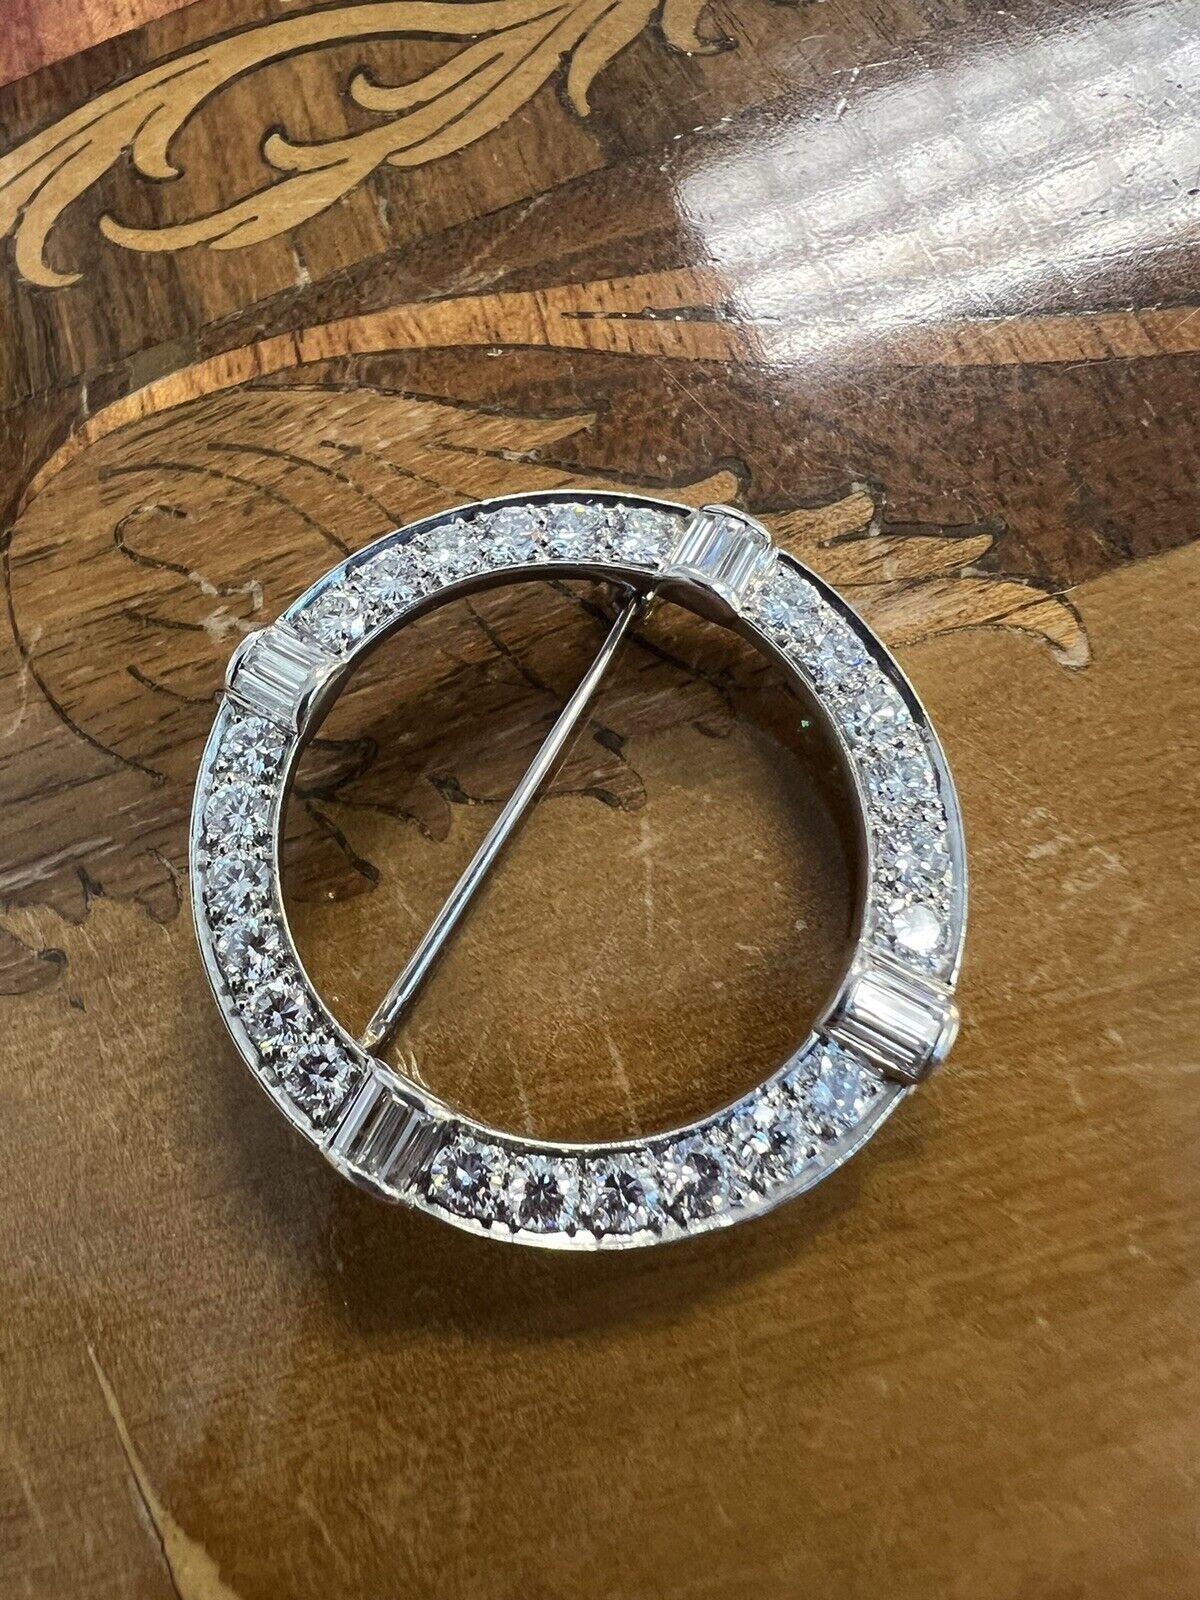 Tiffany & Co. Antique Art Deco Palladium & Diamond Circle Brooch Circa 1920s


Here is your chance to purchase a beautiful and highly collectible designer brooch.  Truly a great piece at a great price! 

Details:
Size : 1.5